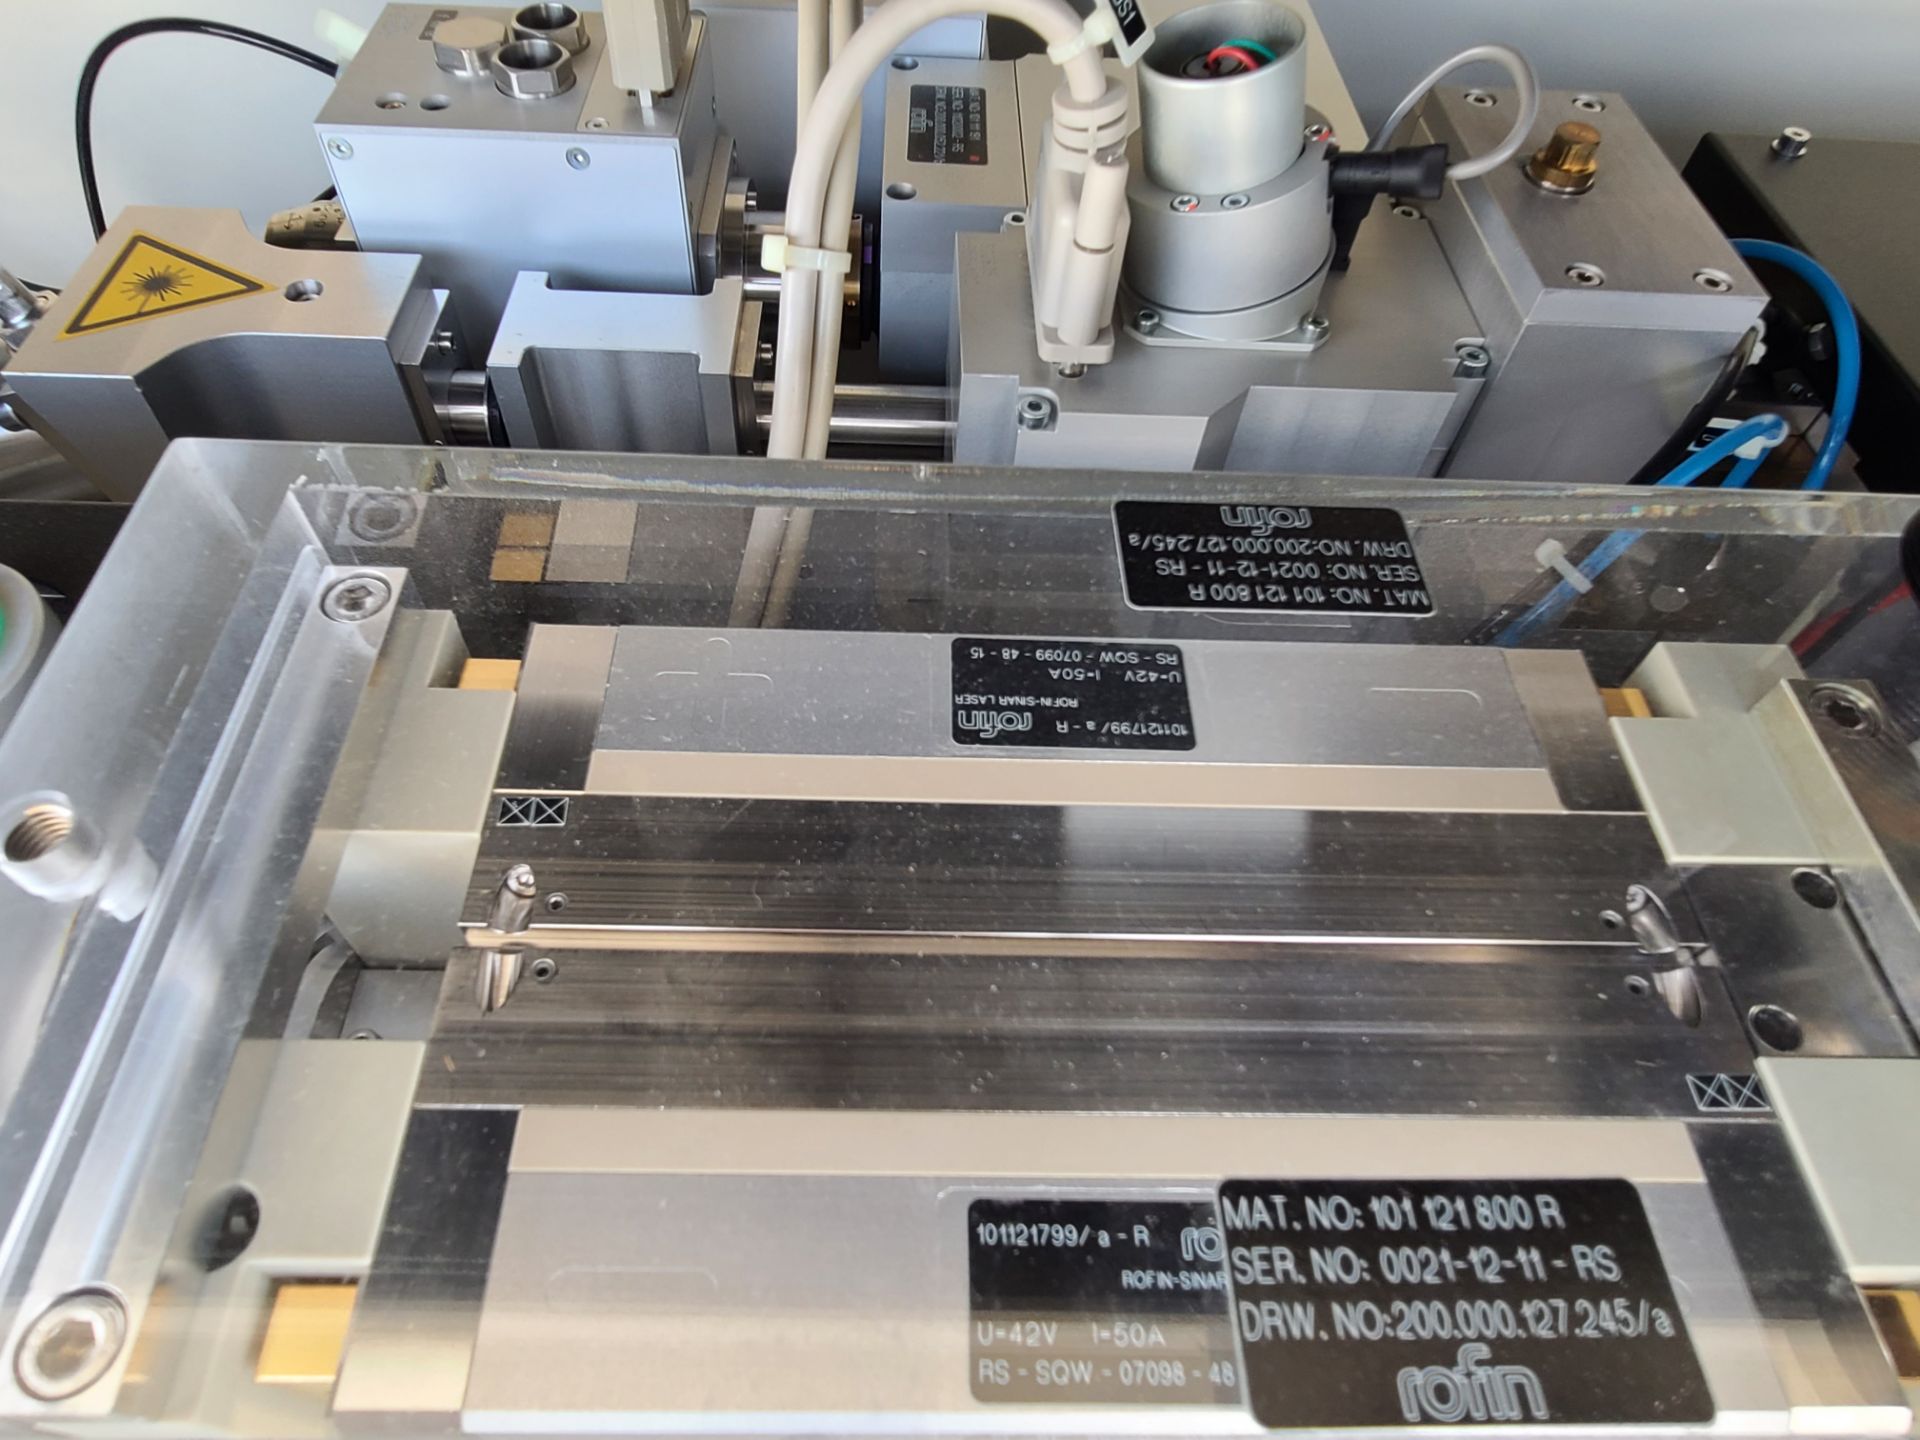 ROFIN SINAR DQ X80 DIODE PUMPED SOLID STATE LASER EDGE DELETION YAG SYSTEM - Image 39 of 84